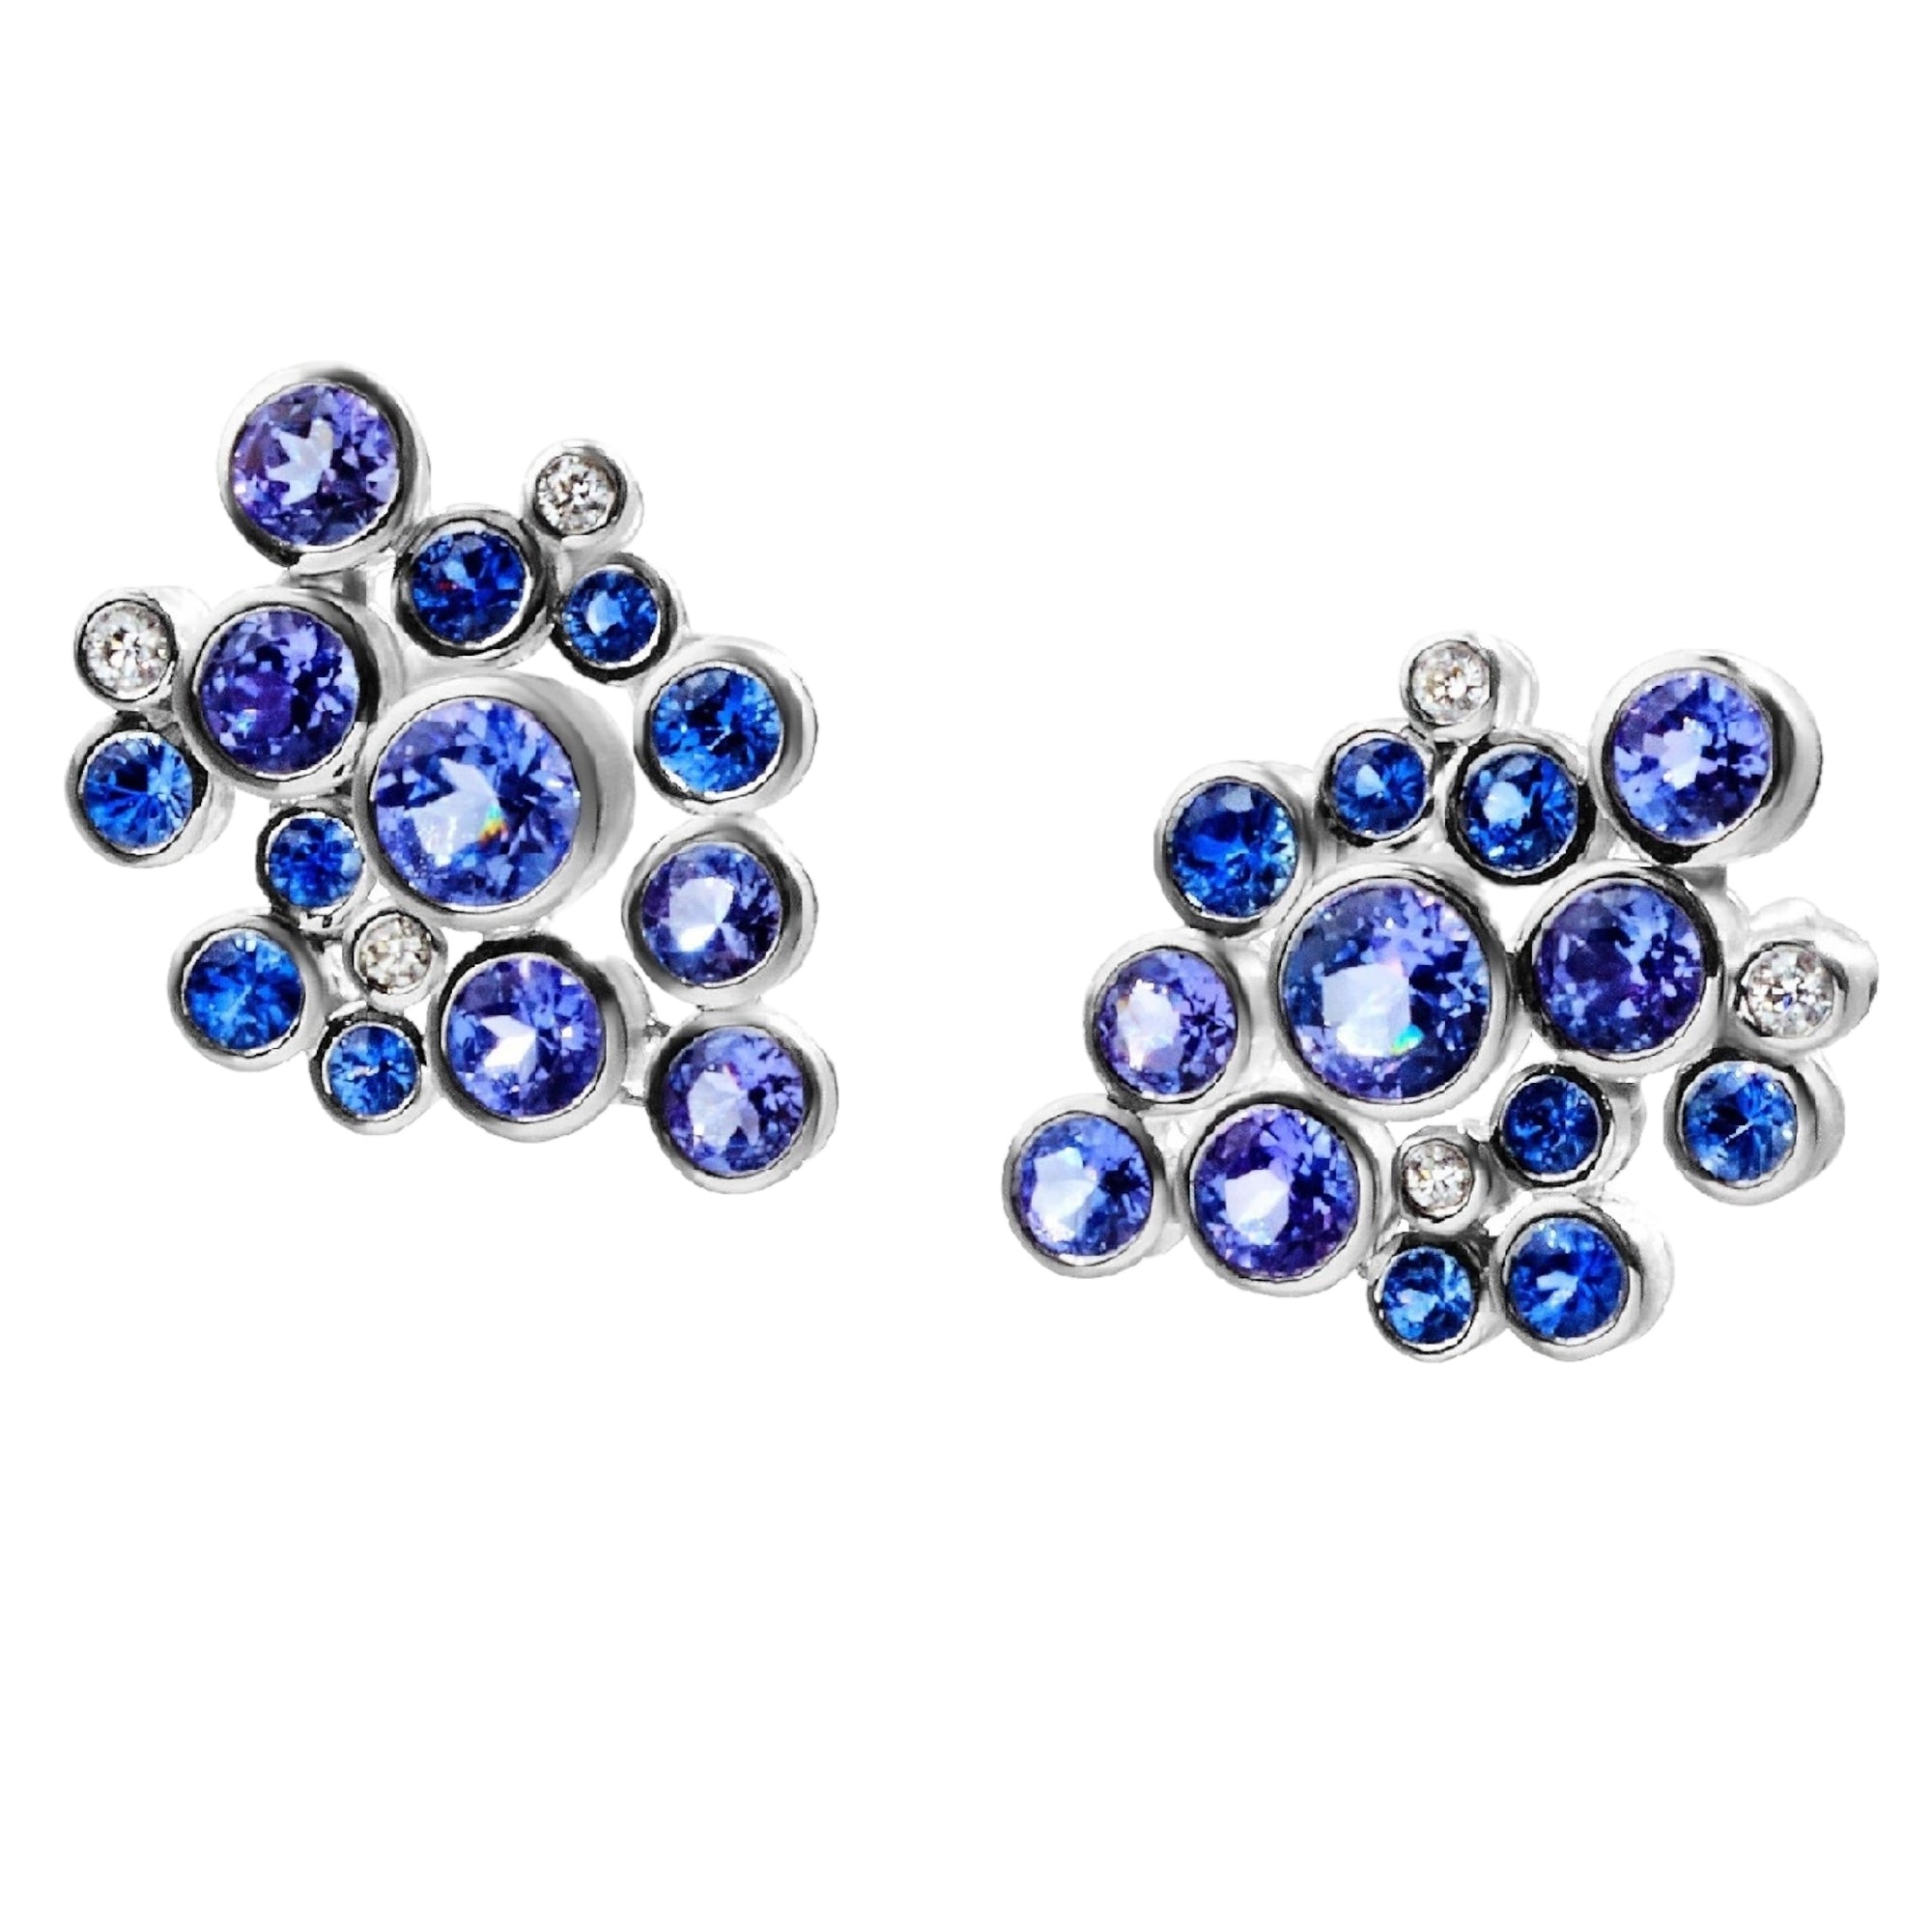 Constellation Cluster Blue Ombre Earrings by Martha Seely available at Talisman Collection Fine Jewelers in El Dorado Hills, CA and online. Stats: Diamonds, sapphires, and tanzanites, oh my! These constellation inspired earrings are comprised of 0.92 cts of sapphires, 2.20 cts of tanzanites and 0.1 cts of diamonds, all bezel set and glittering like stars in the sky. Post style earrings in 14k gold. Measure .75" x .5” w. 